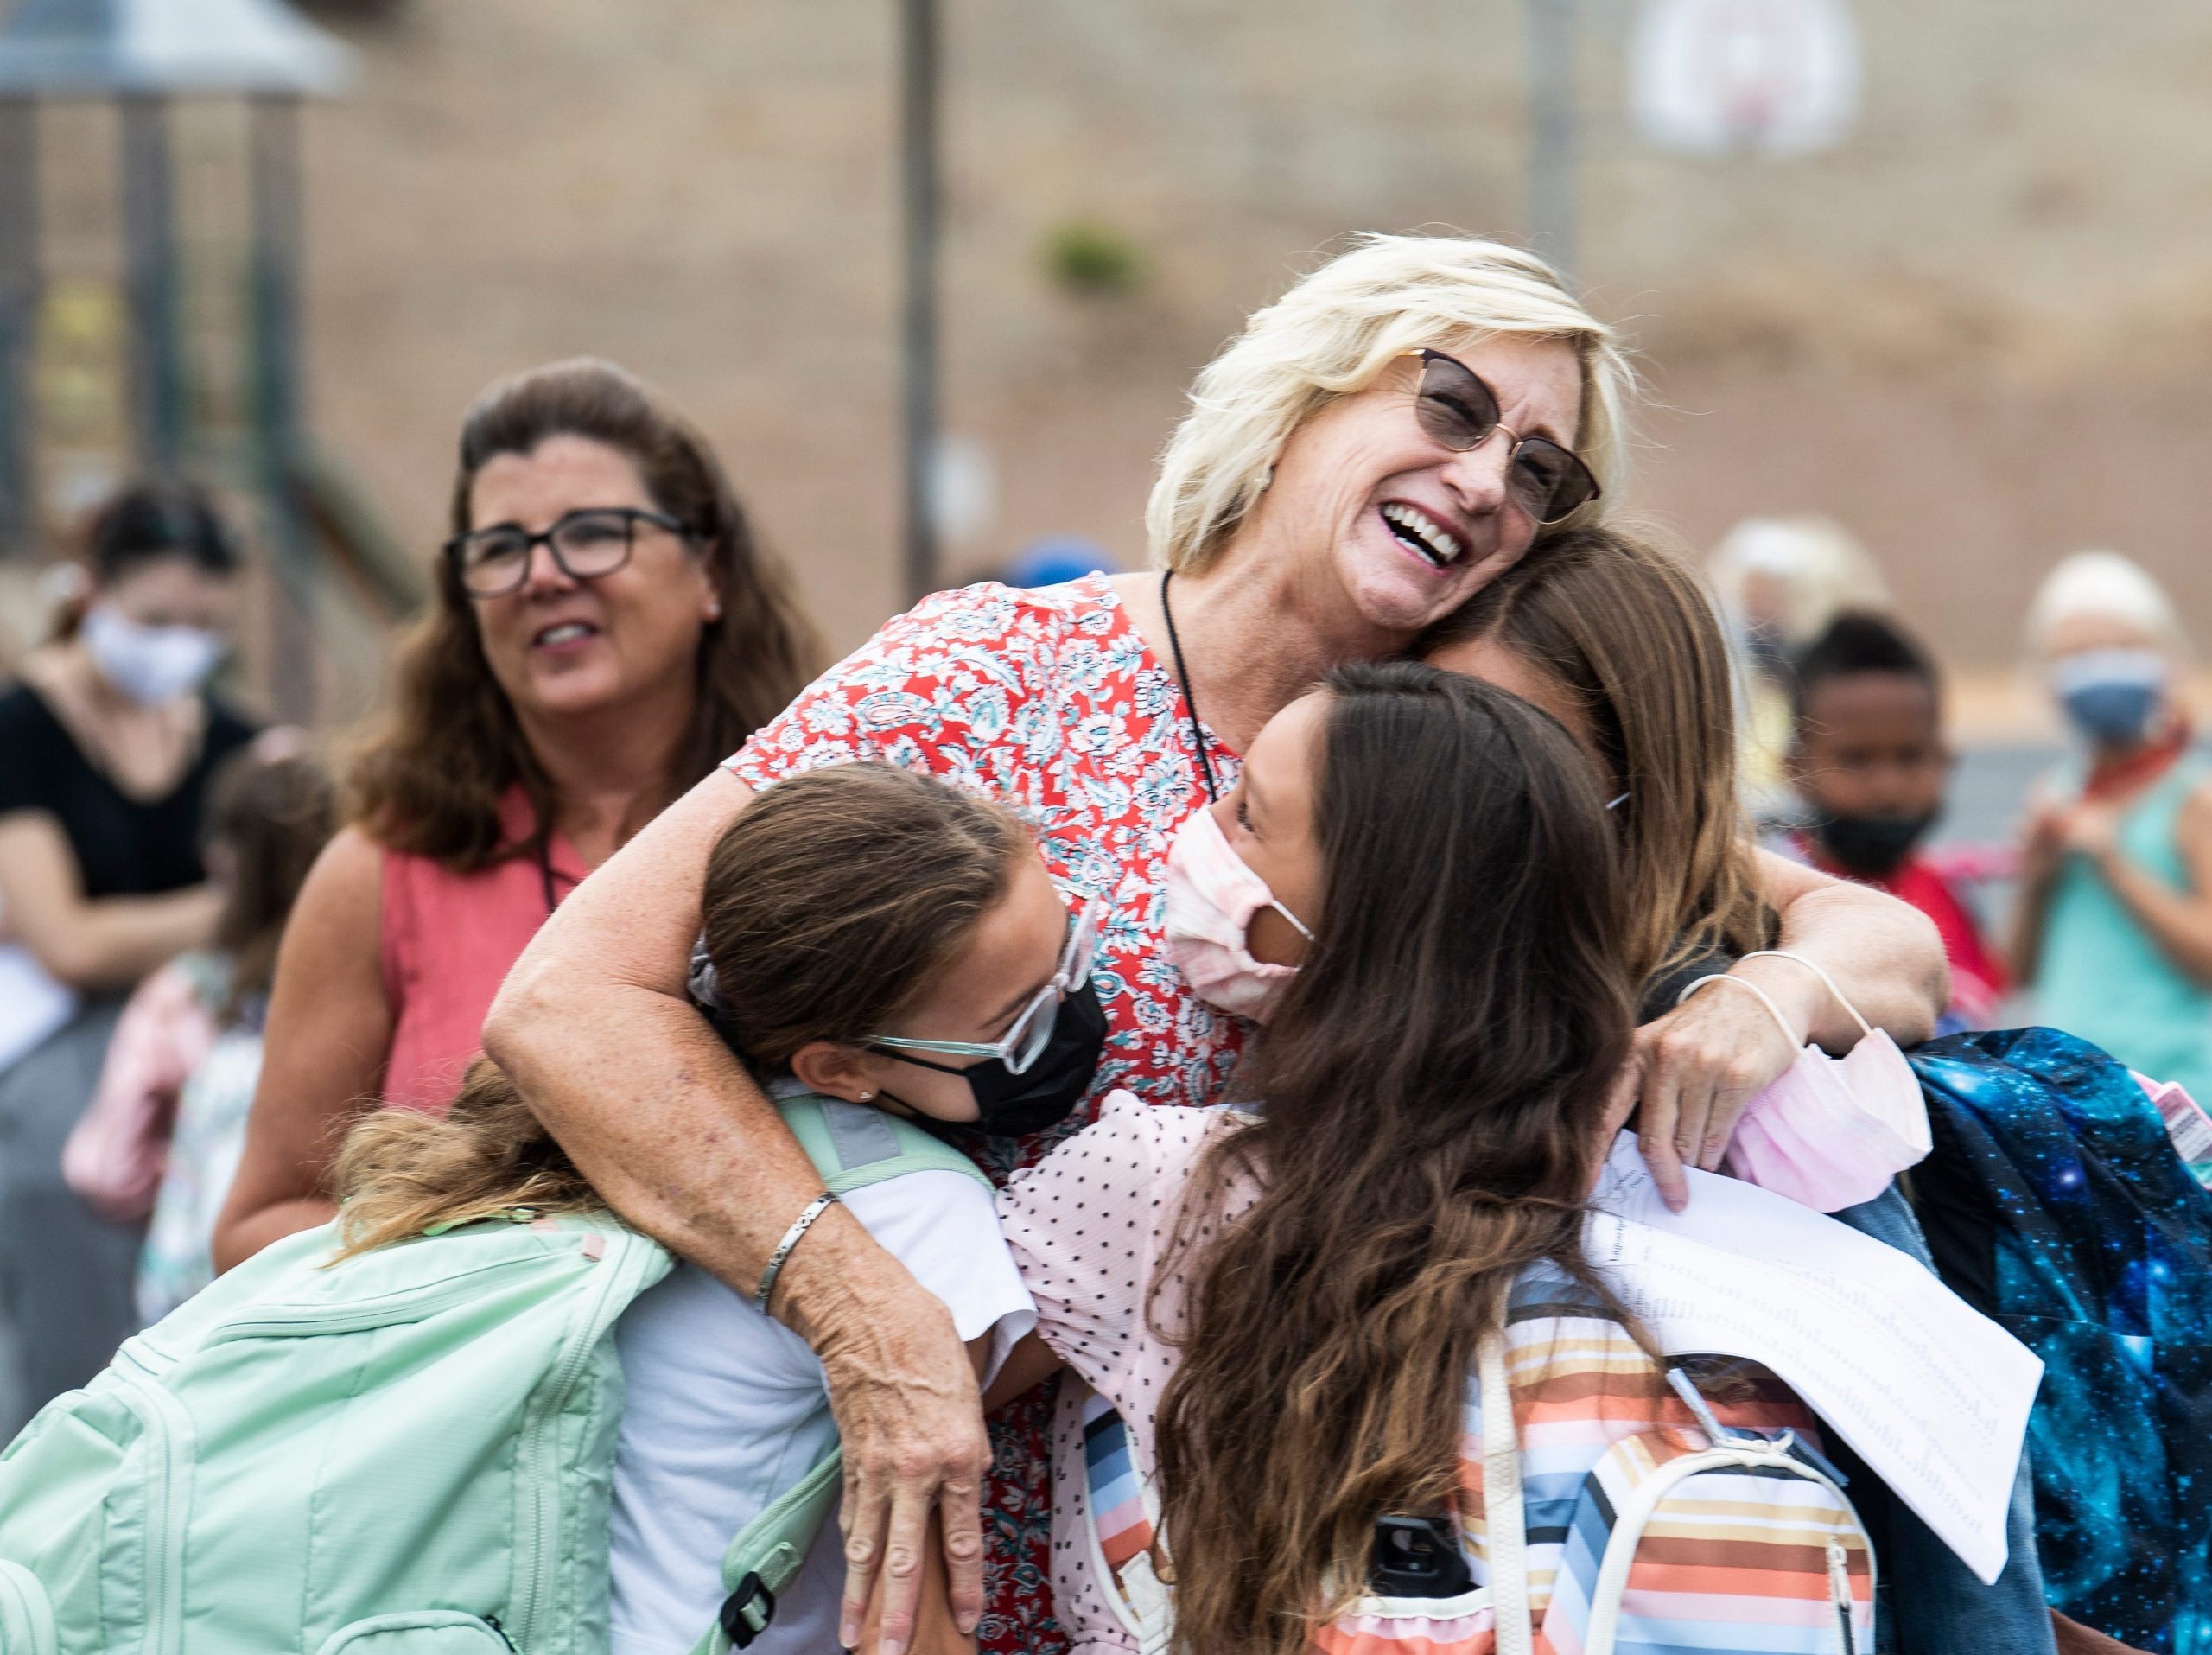 A teacher hugs three of her students from last year during the first day of class at Laguna Niguel Elementary School in Laguna Niguel on Tuesday, August 17, 2021.